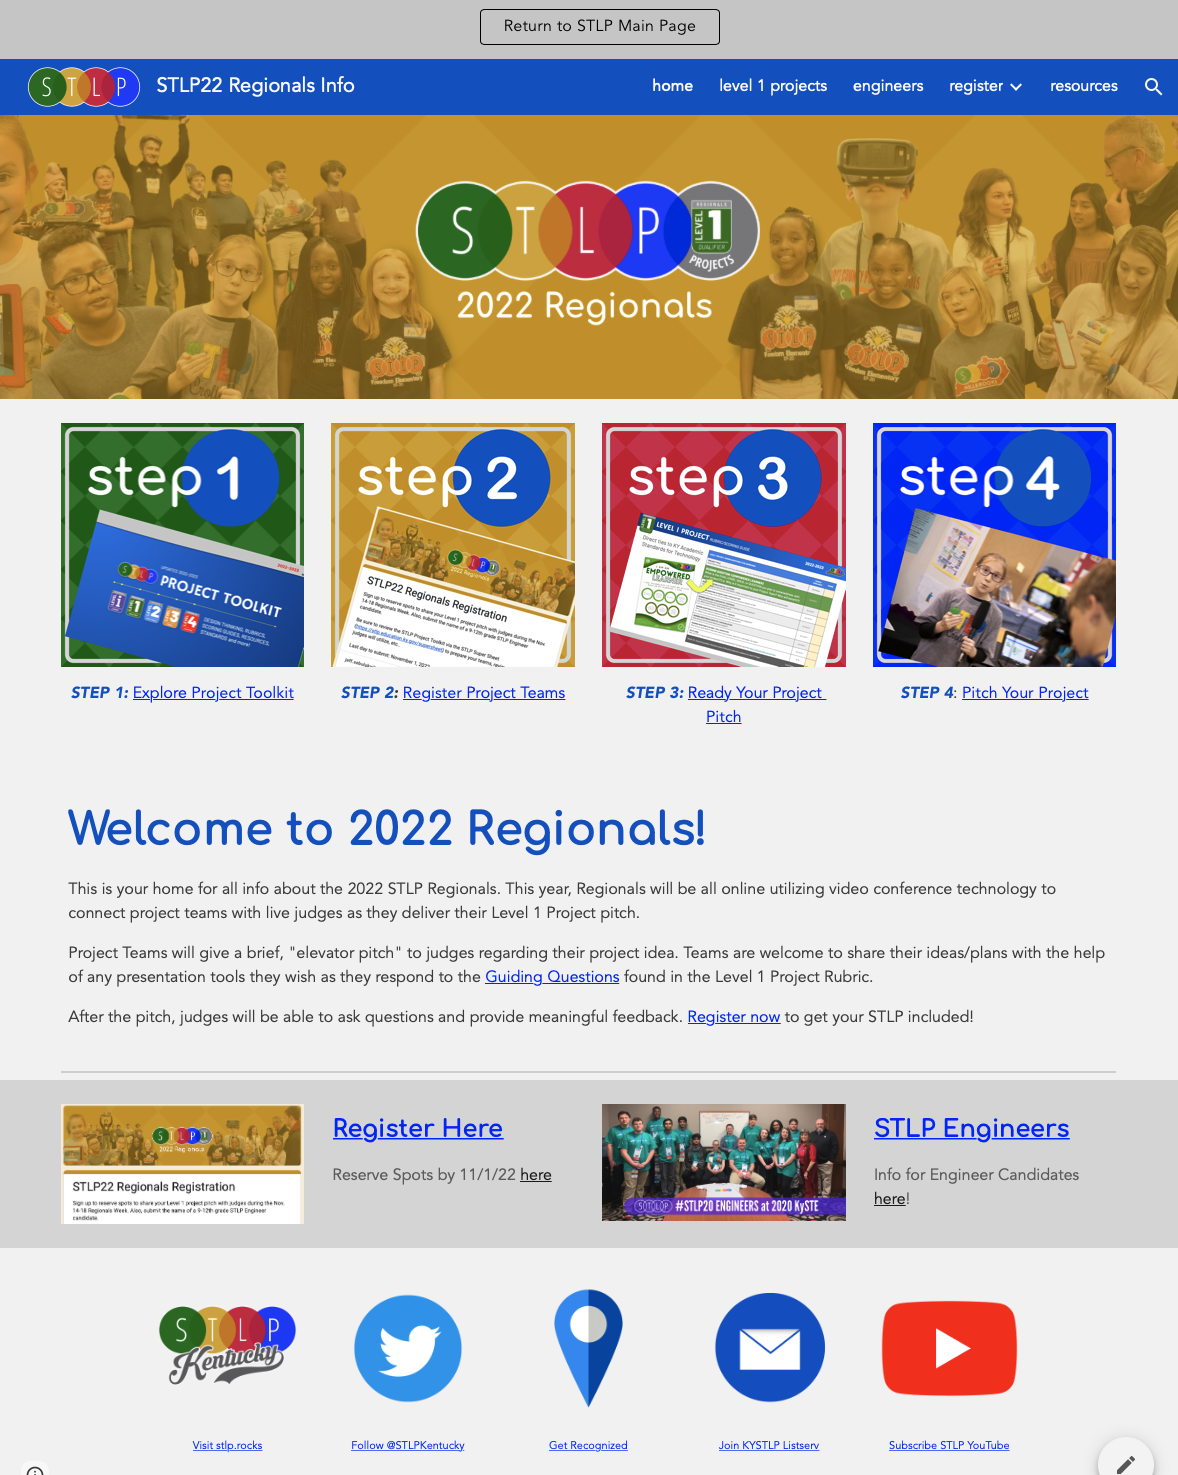 Link to STLP22 Regionals Info Page - click here